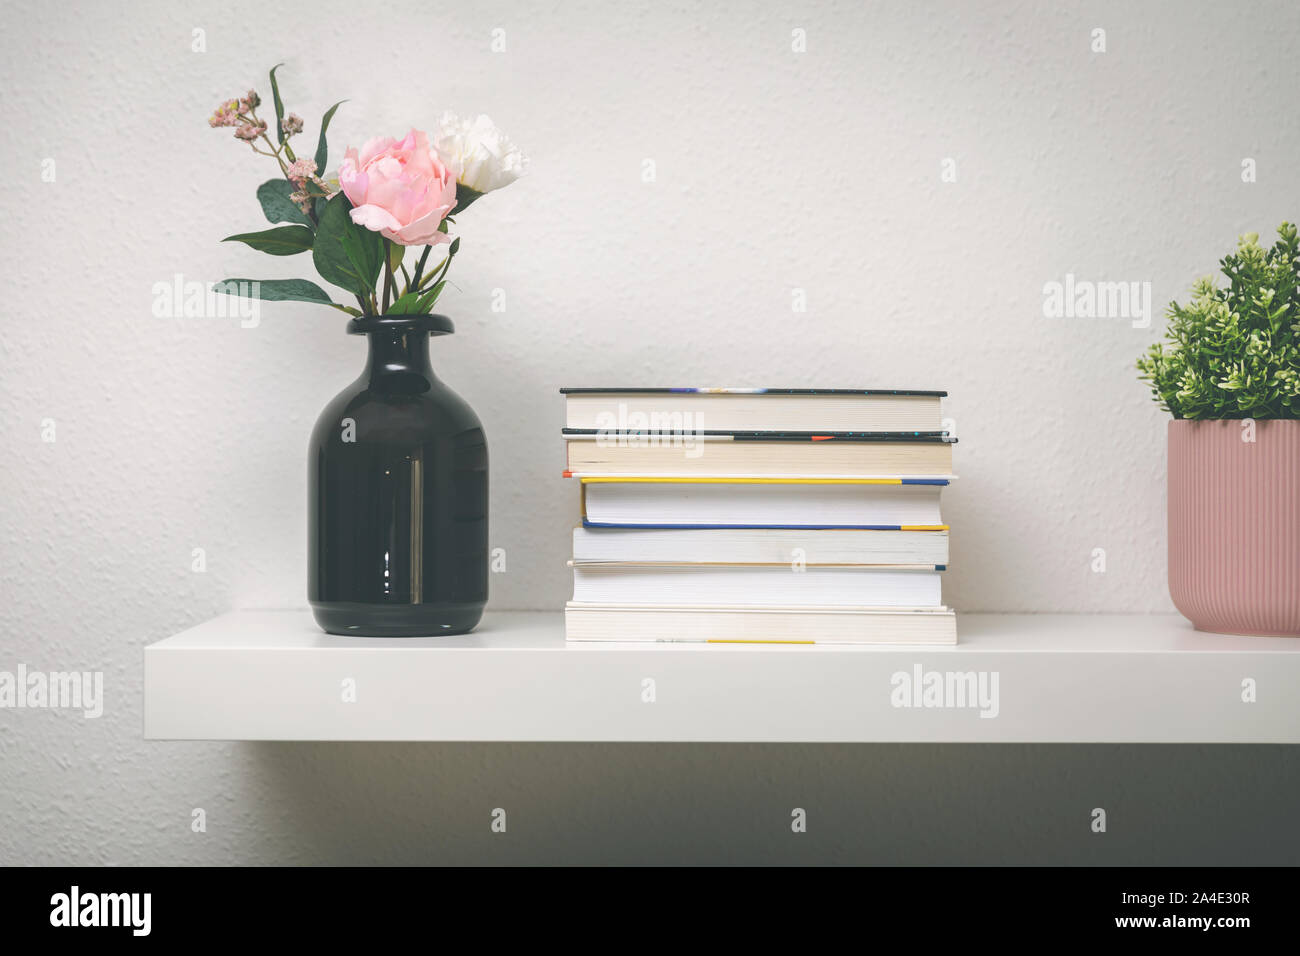 shelf on white wall with books and flower pots Stock Photo